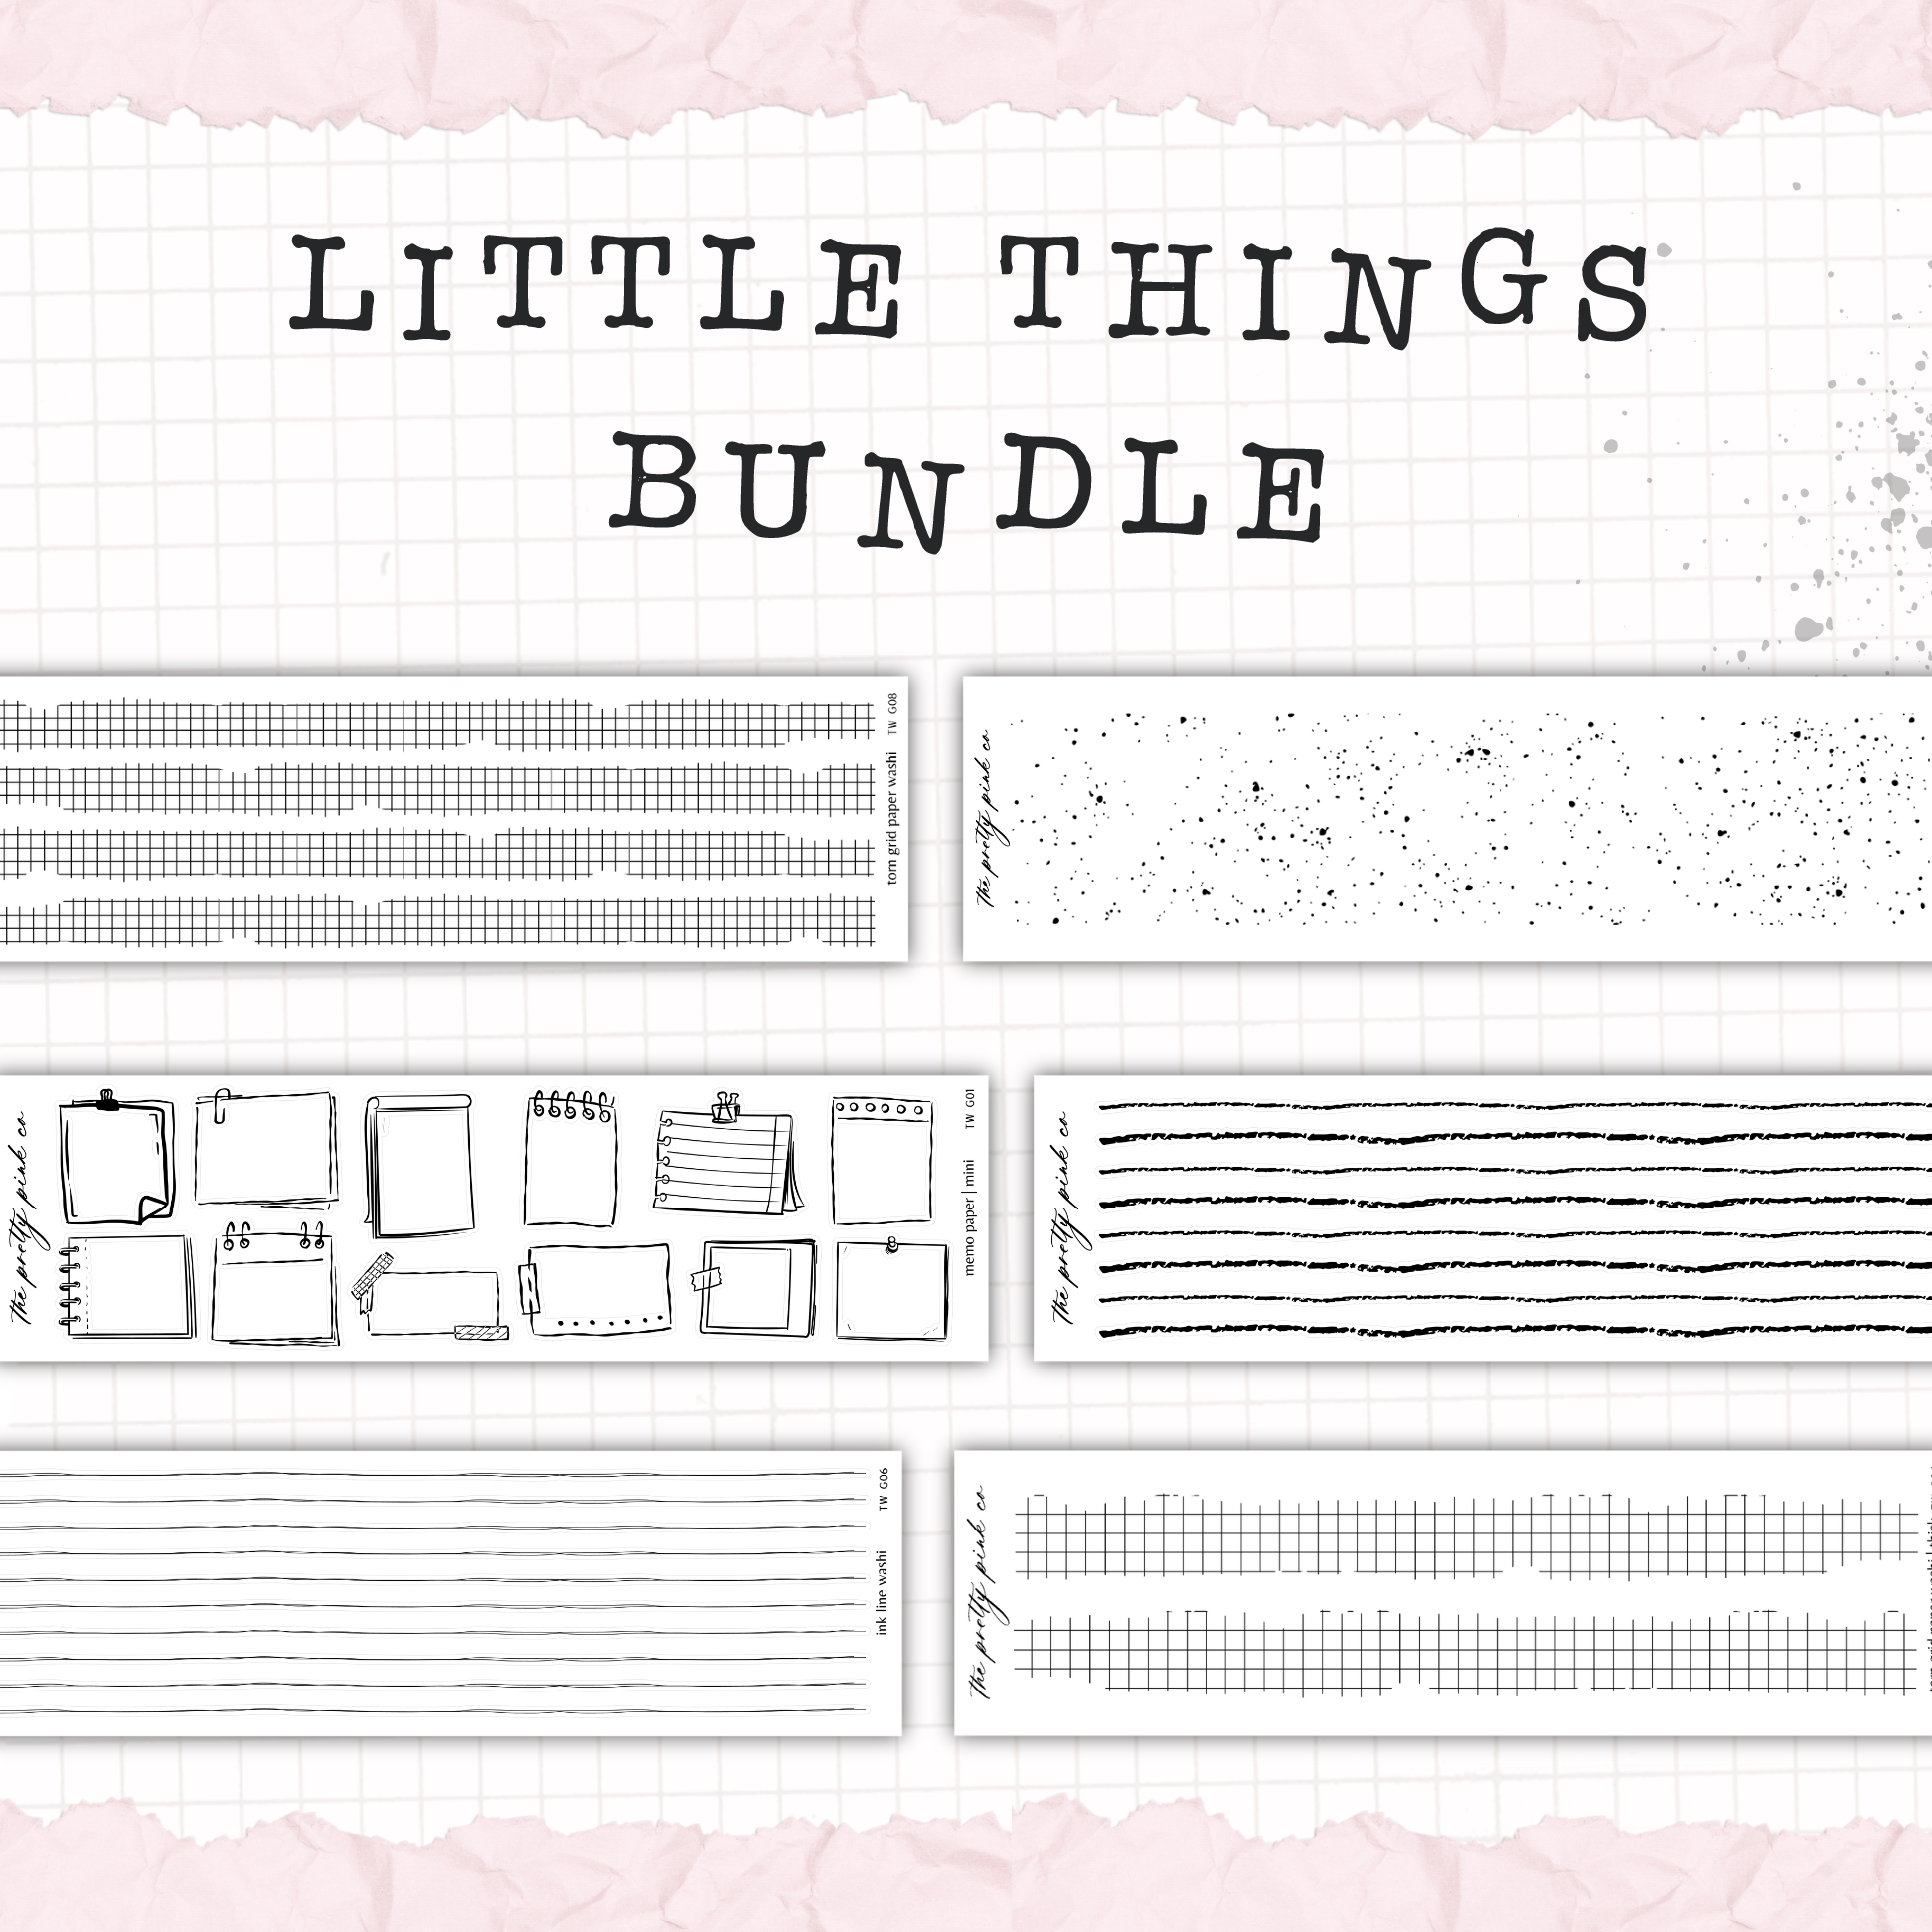 the little things bundle is shown in black and white